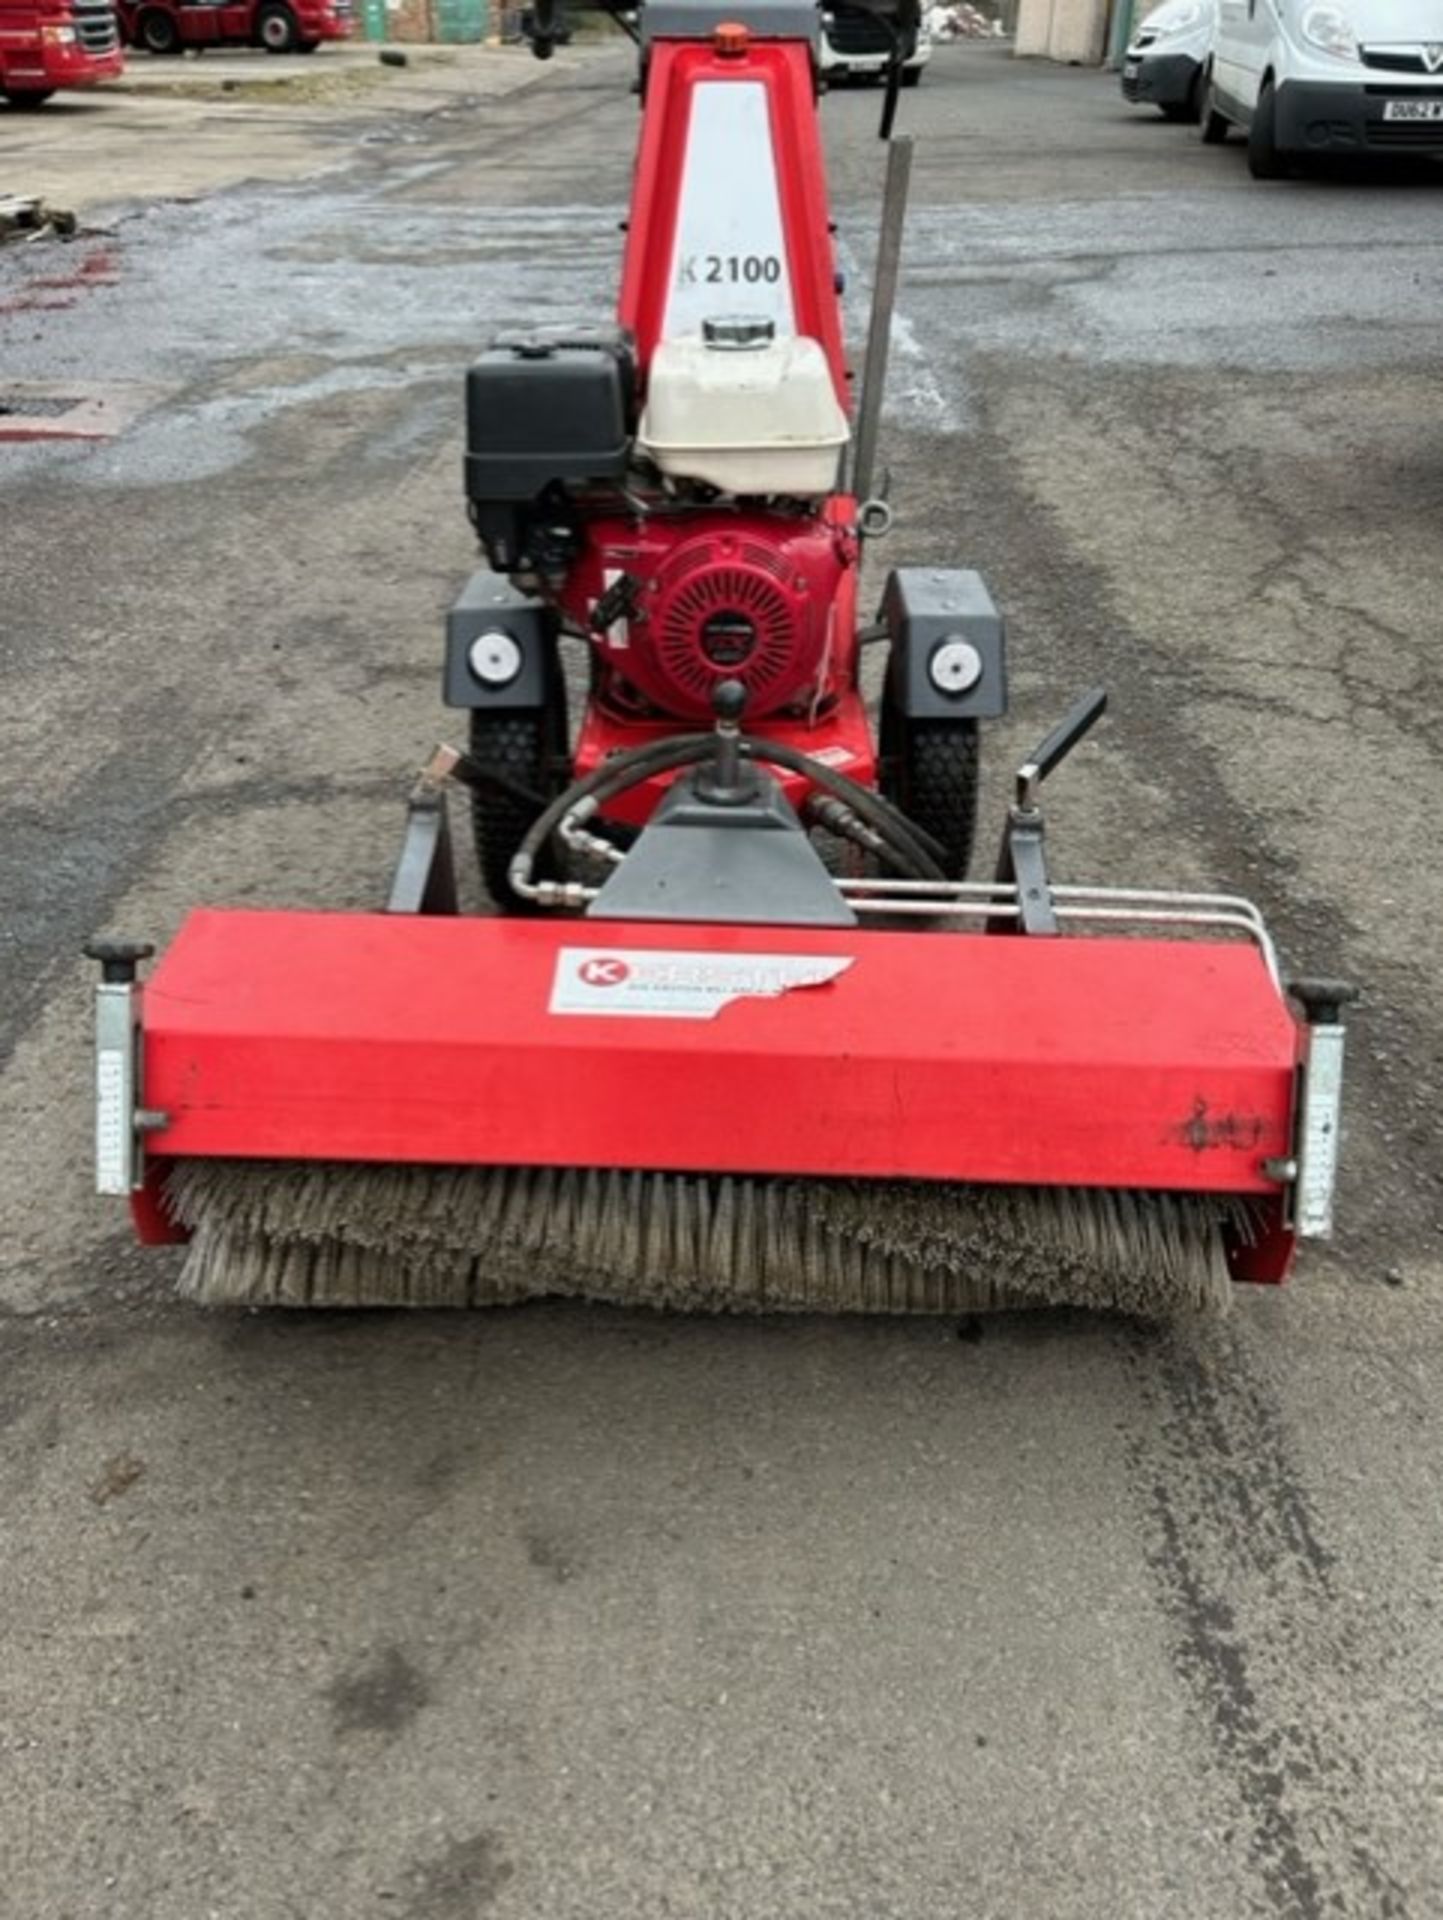 2019 Kersten k2100 hydraulic 2 wheeled tractor unit with sweeper attachment, kerb sweeper attachment - Image 3 of 4